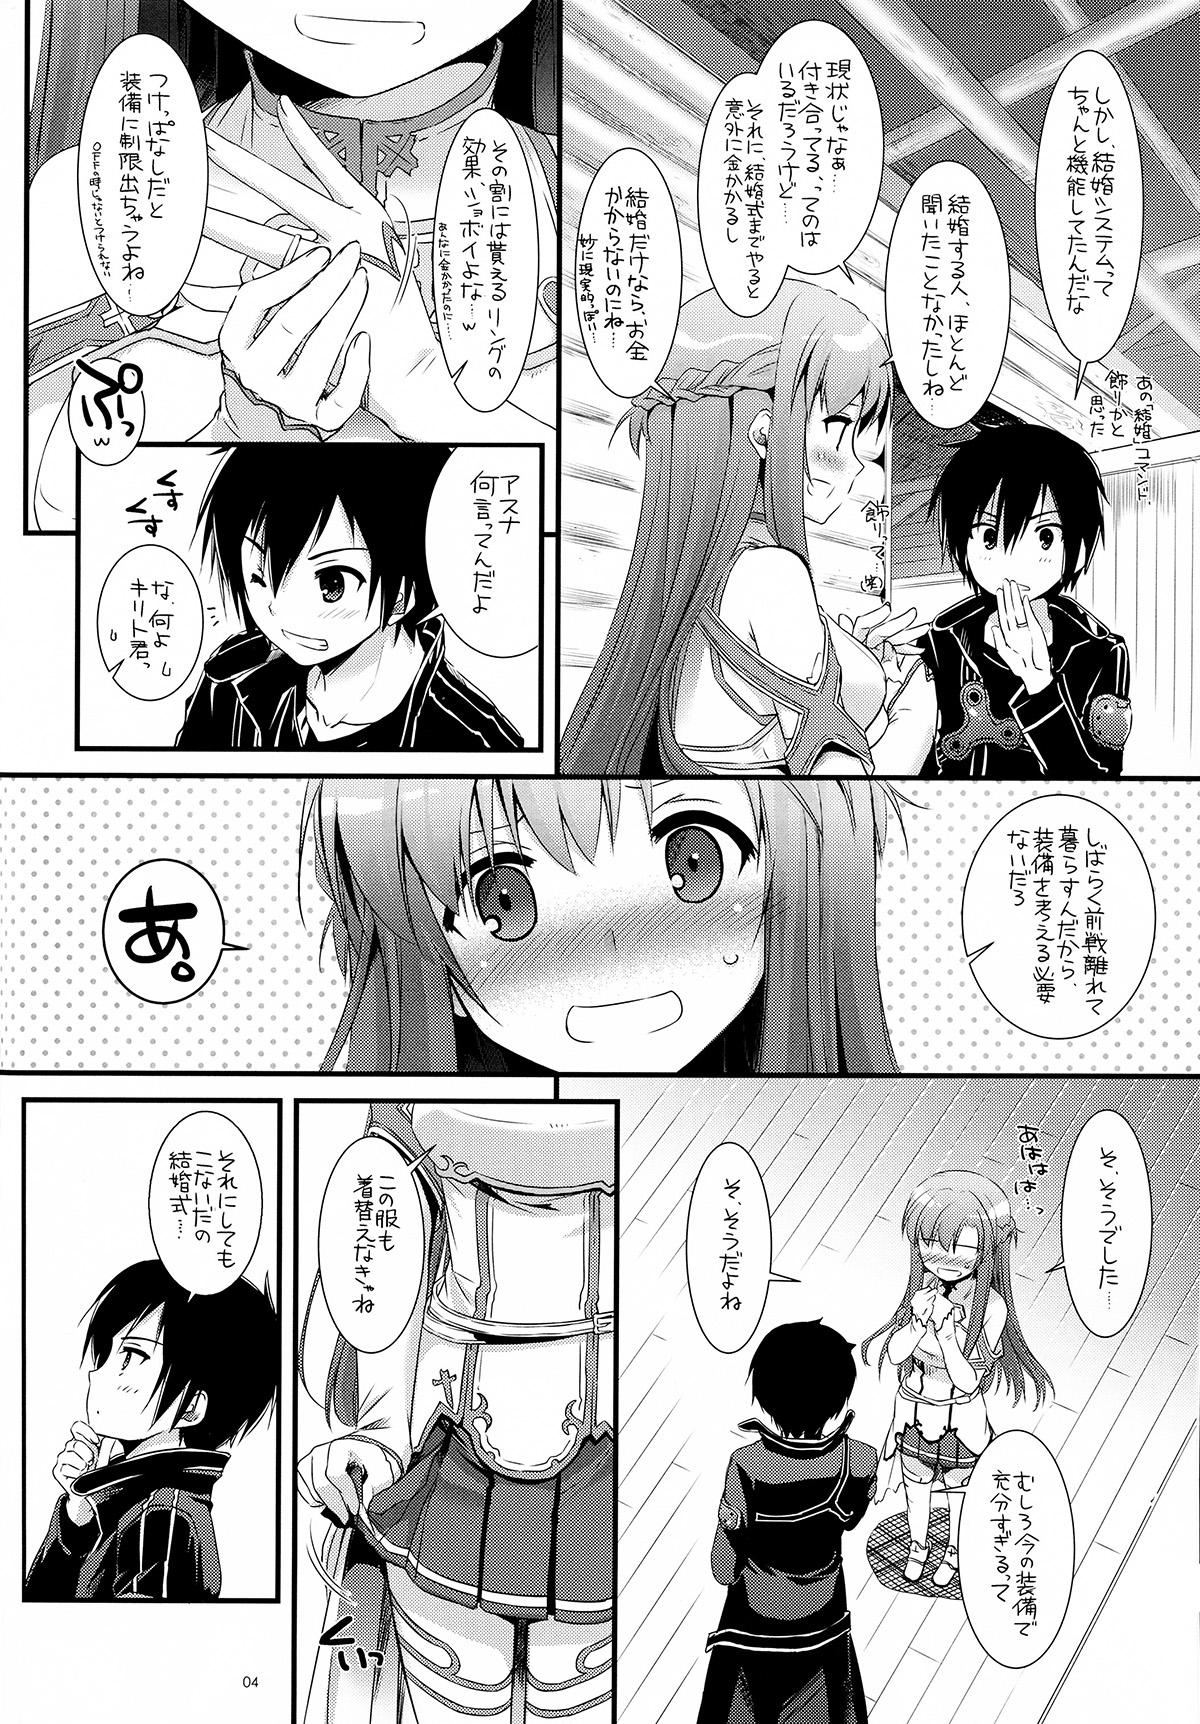 Hard Fucking D.L.action 71 - Sword art online Fuck Her Hard - Page 4